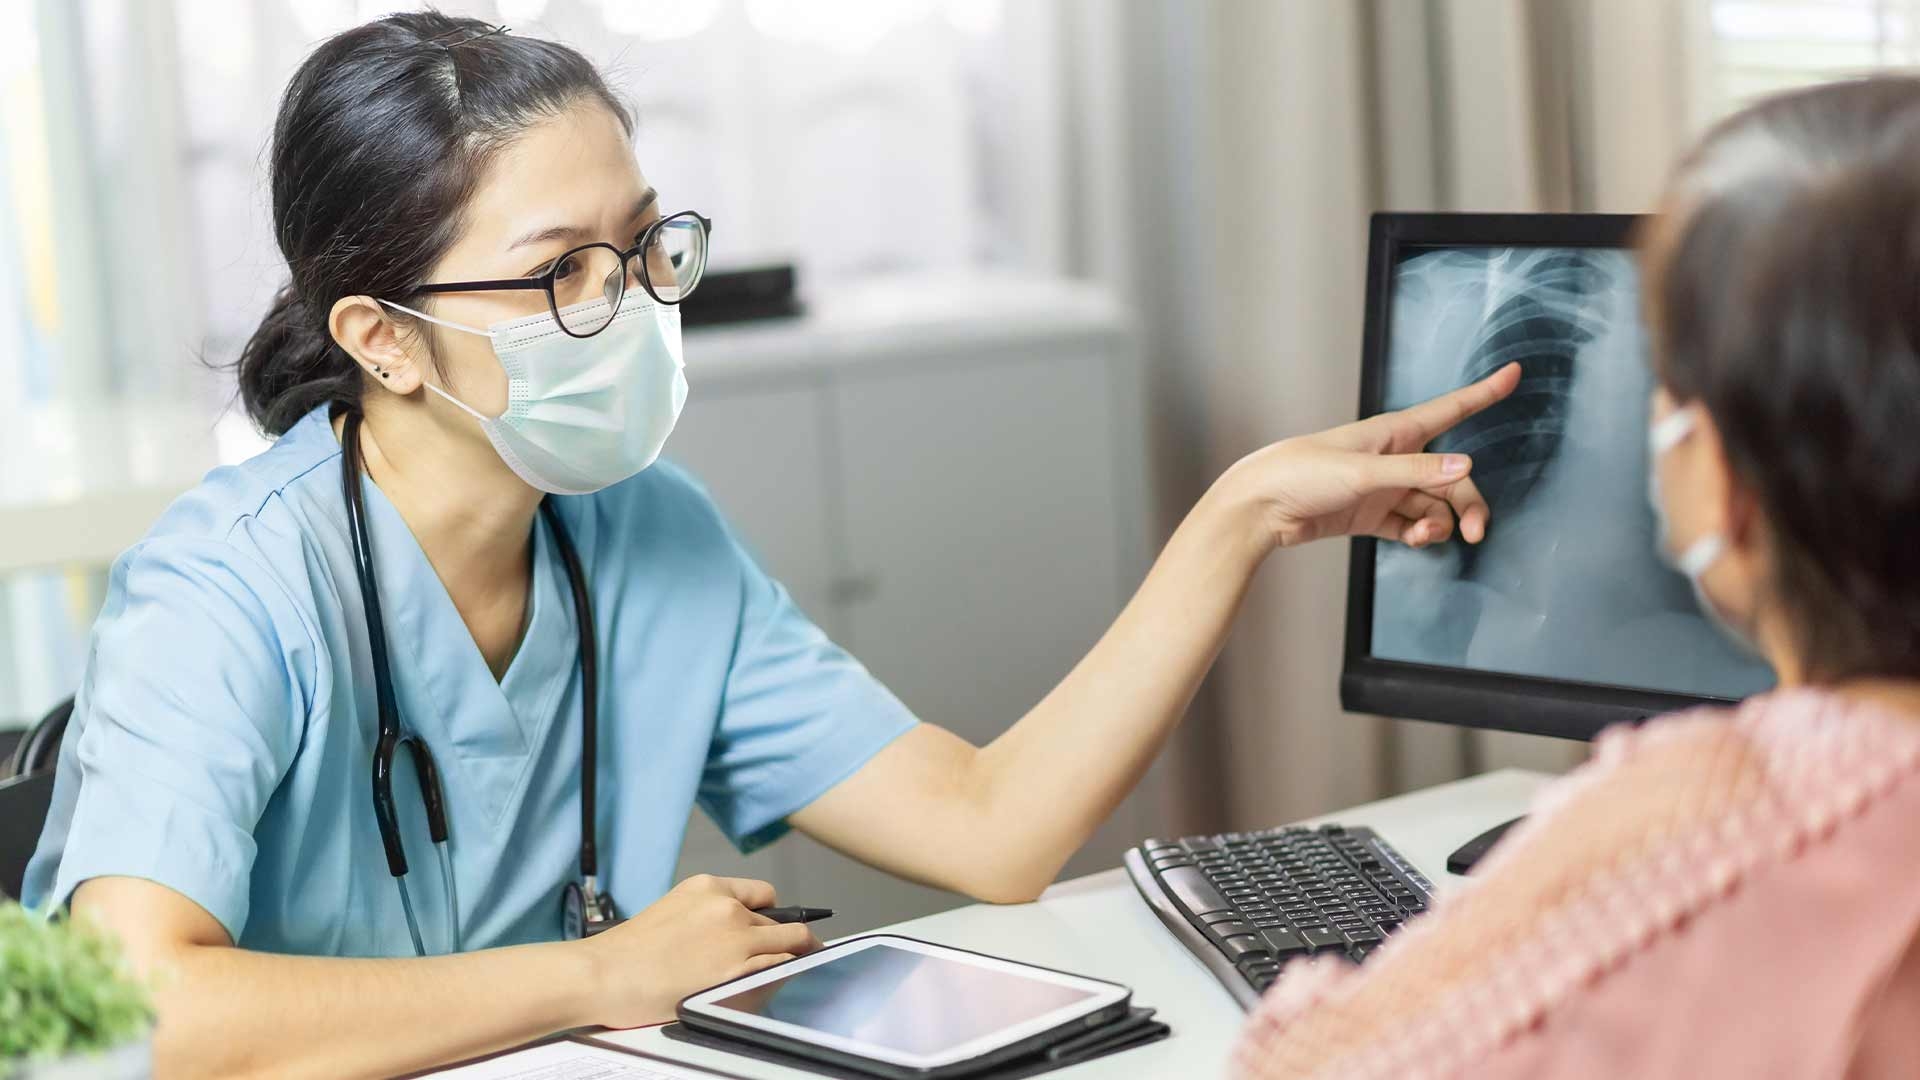 Female doctor in medical mask examining and pointing to radiological chest X-ray film on monitor computer while talking with elderly woman patient at hospital room.